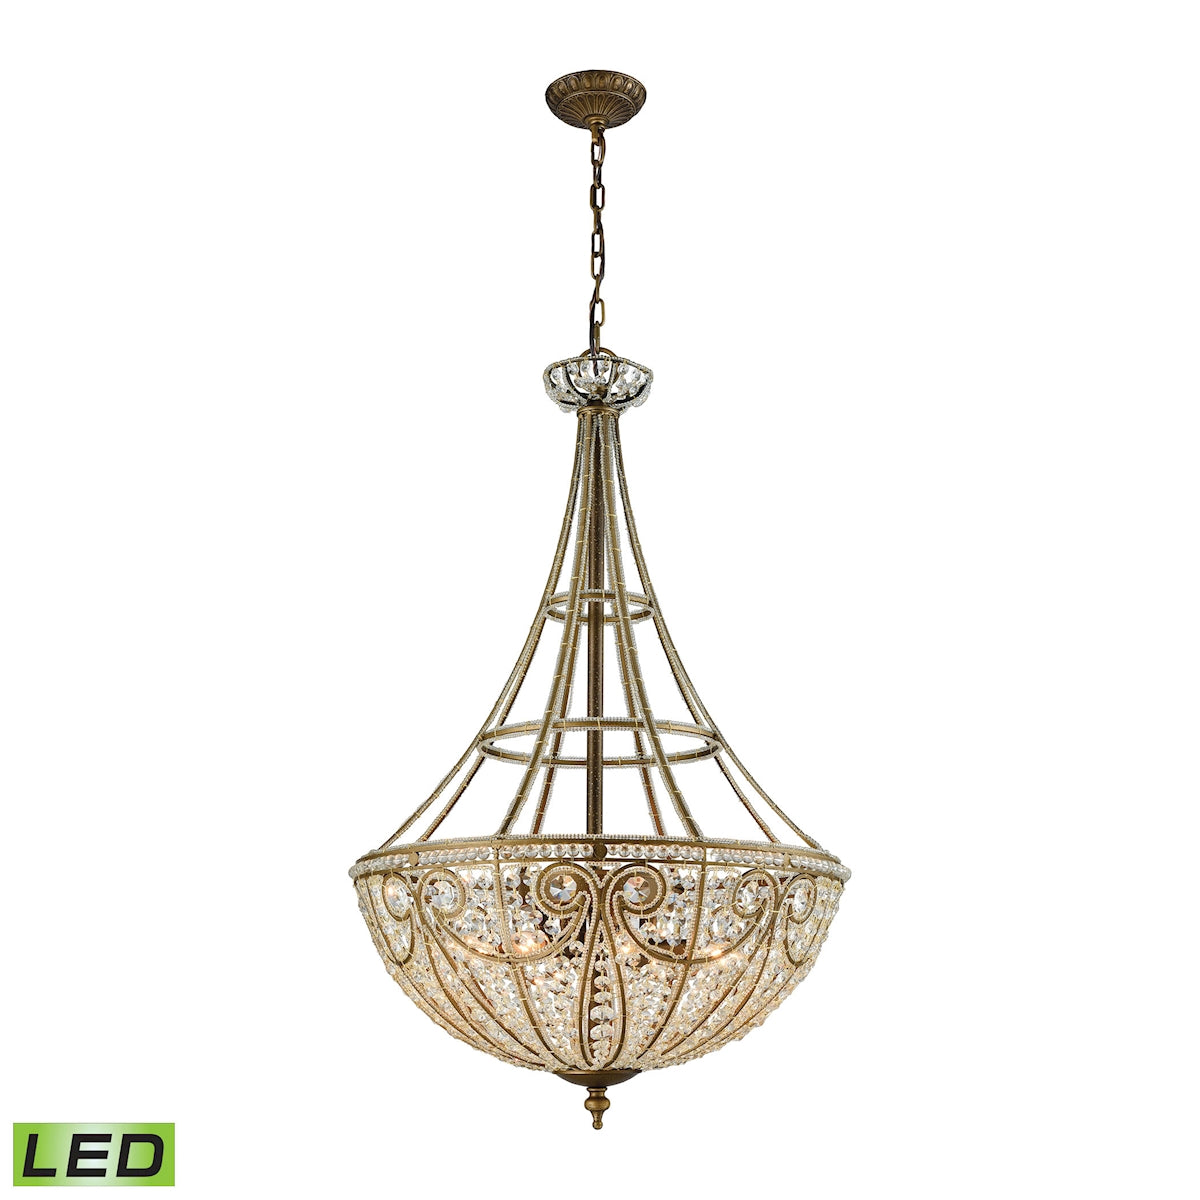 Elizabethan 8-Light Chandelier in Dark Bronze with Clear Crystal - Includes LED Bulbs